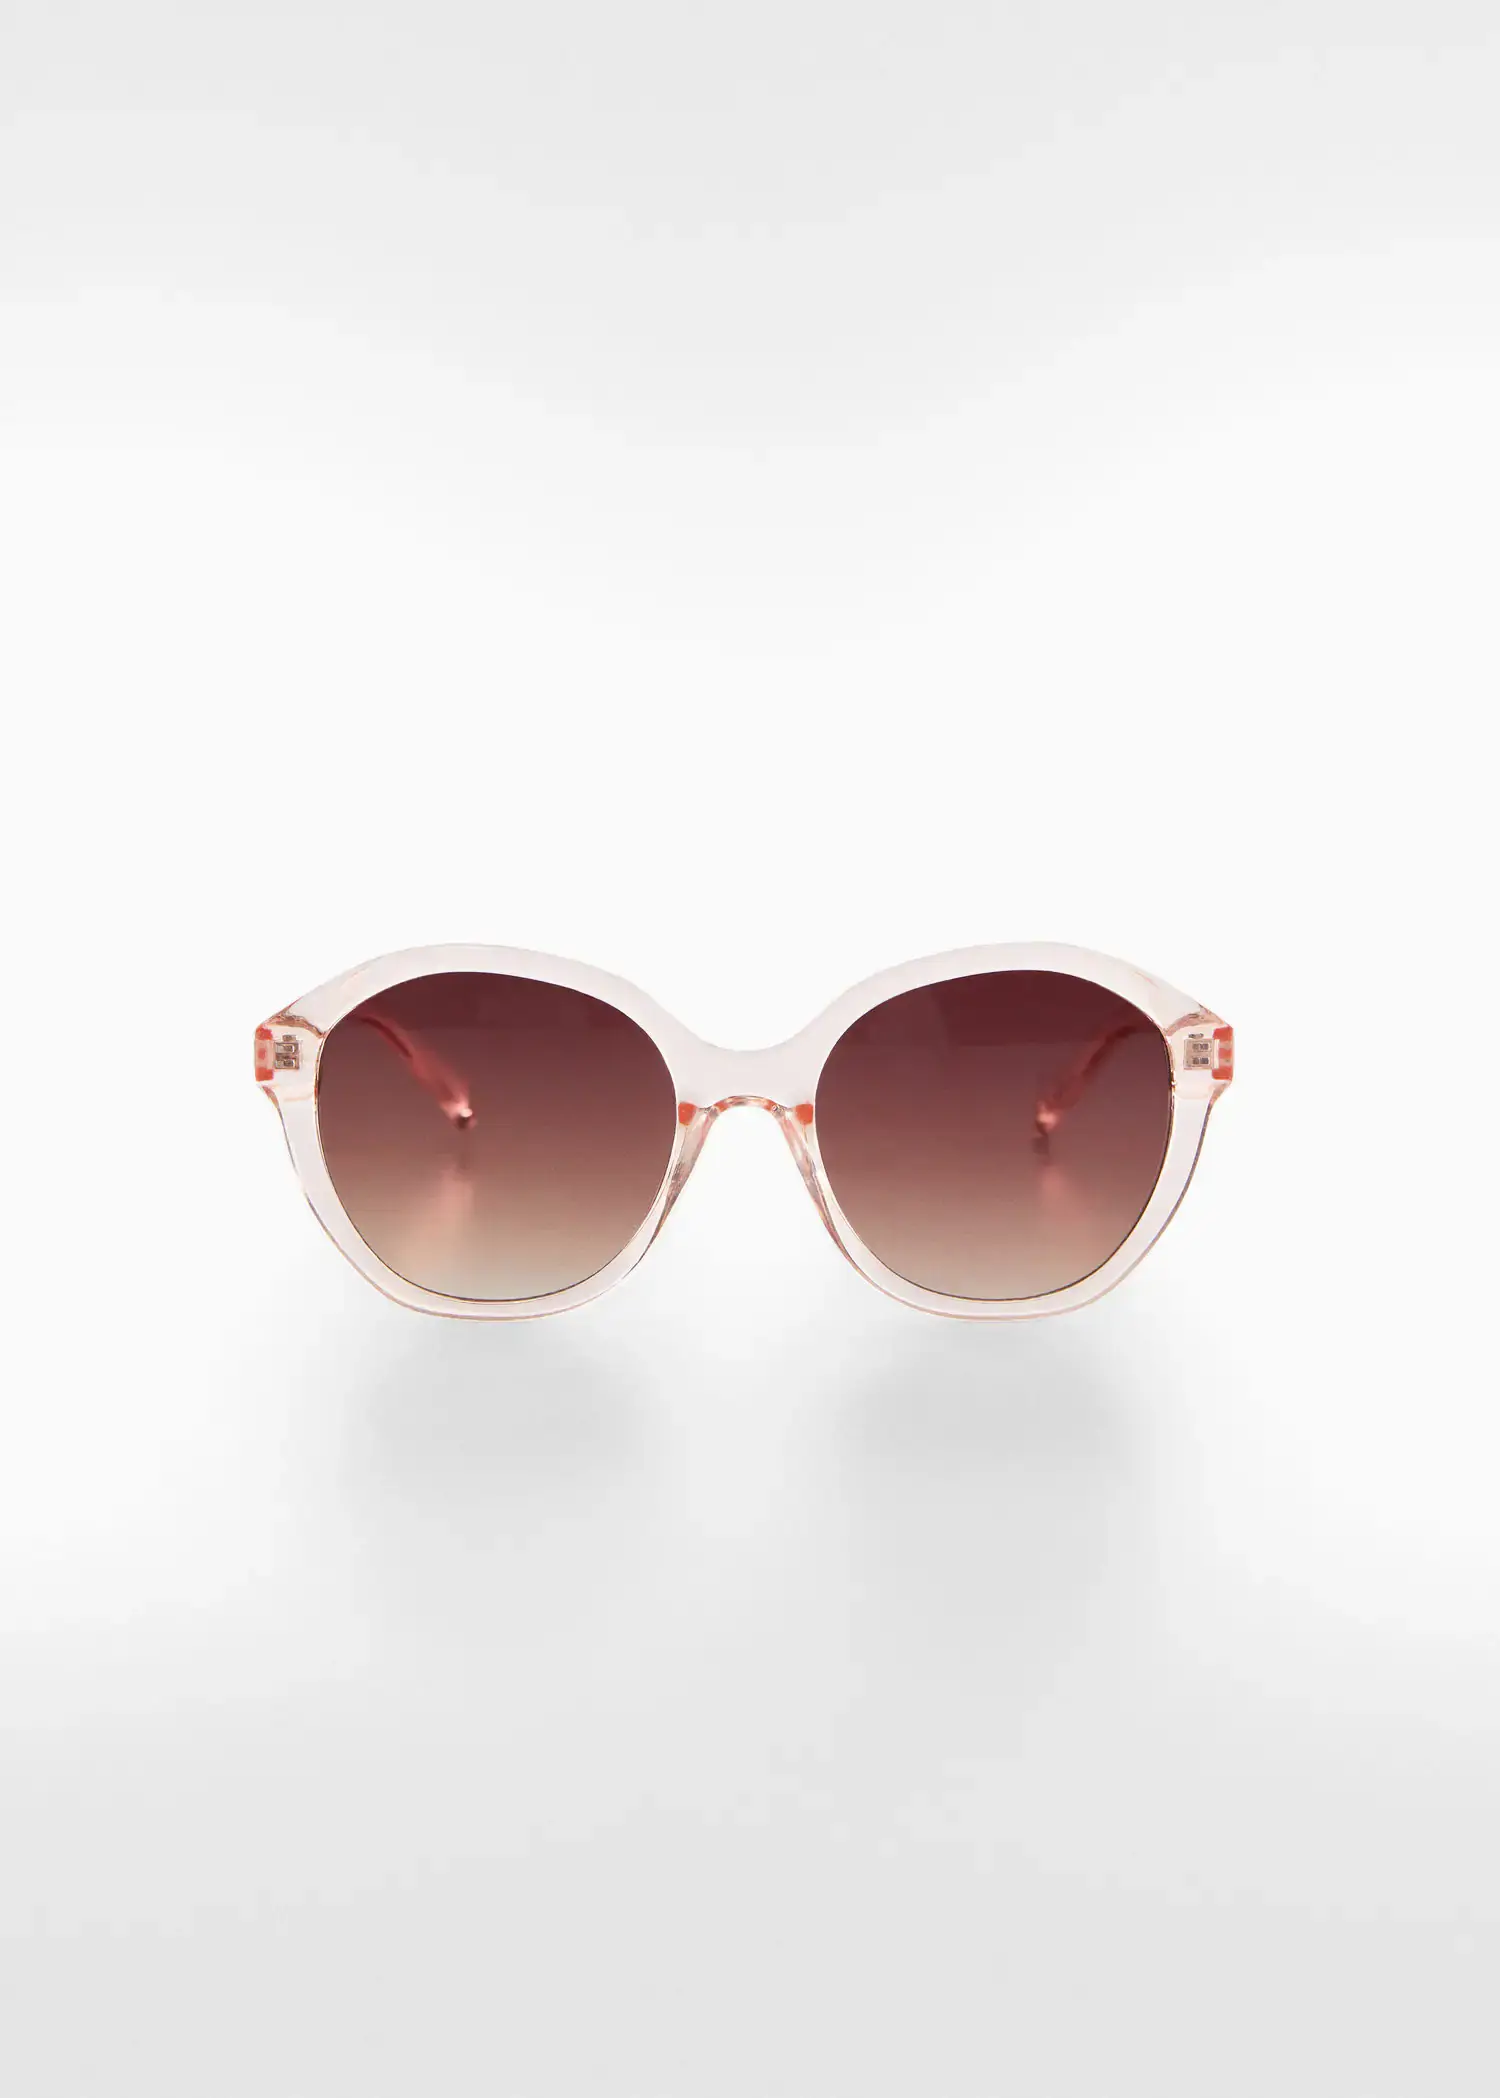 Mango Tortoiseshell rounded sunglasses. a pair of sunglasses sitting on top of a white table. 